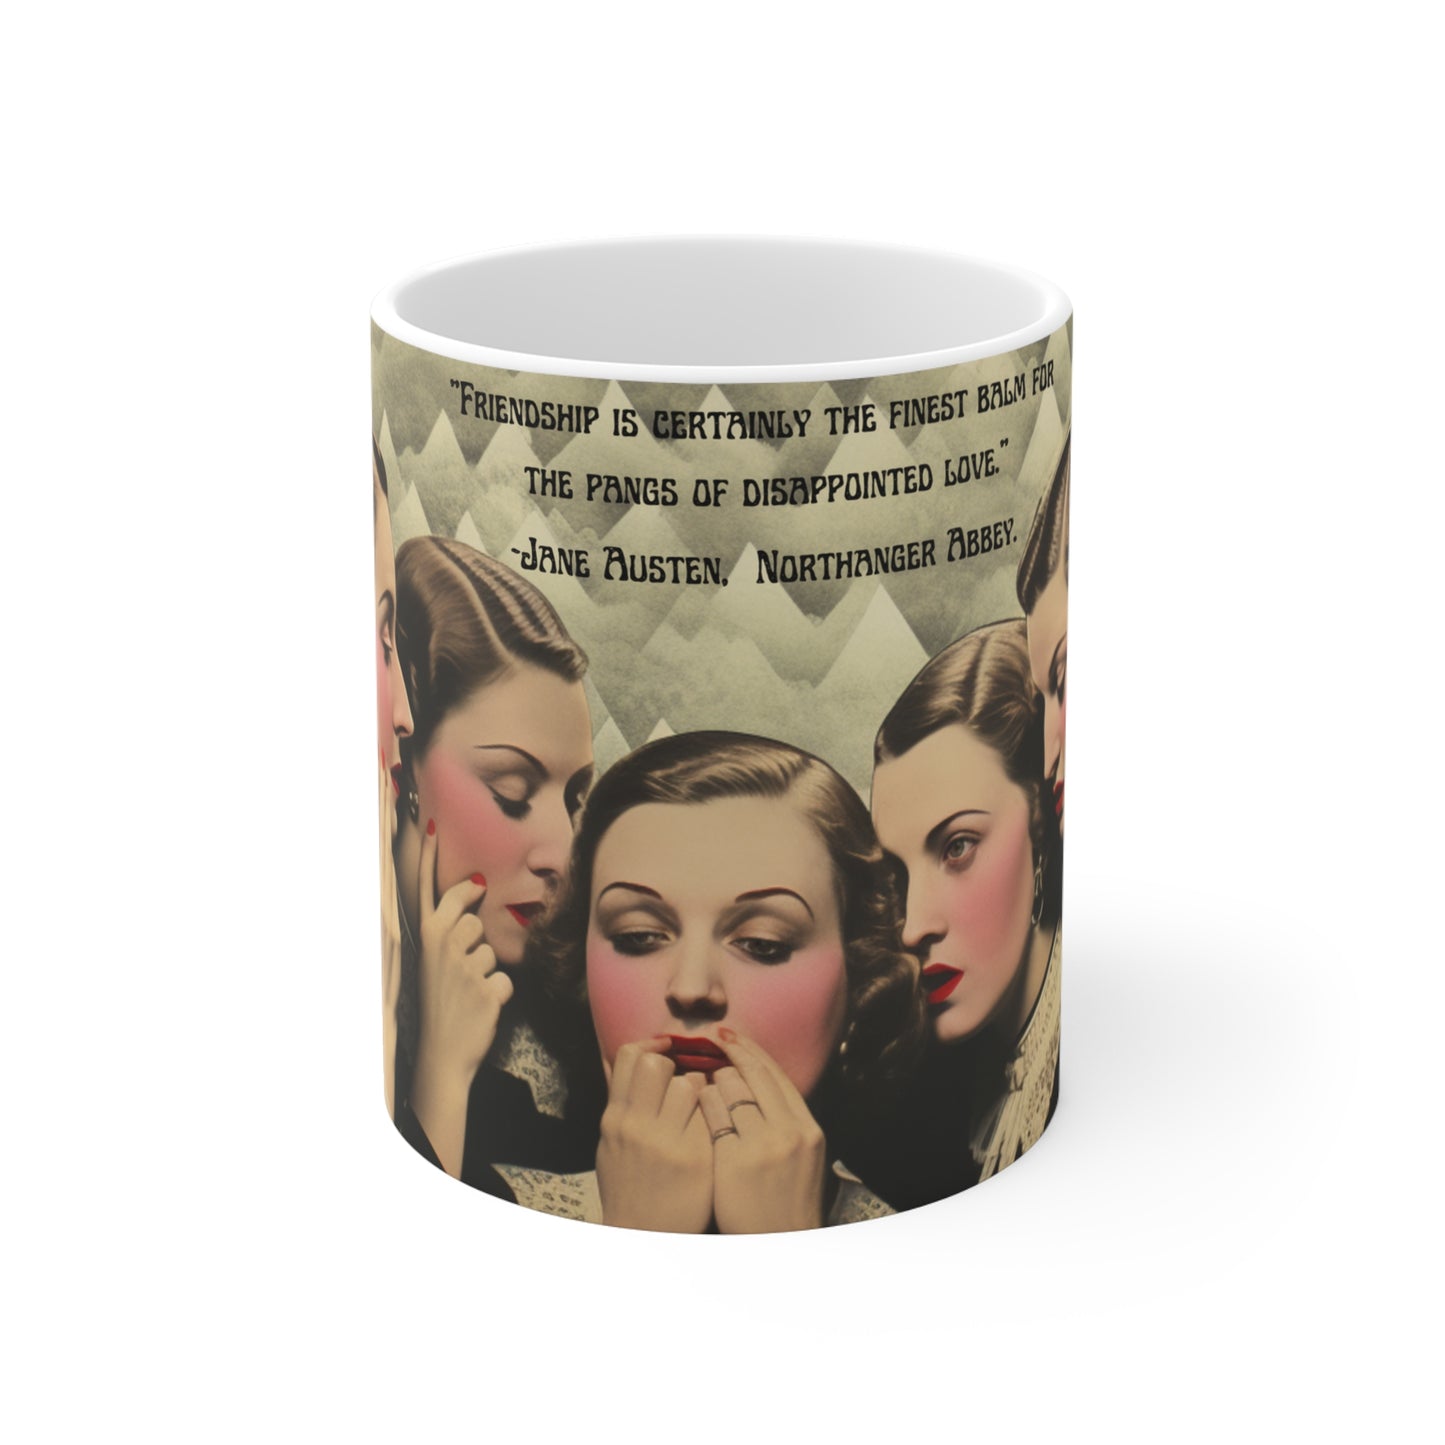 Jane Austen 'Northanger Abbey' Quote Mug - The Ideal Companion for Book Lovers and Beverage Enthusiasts